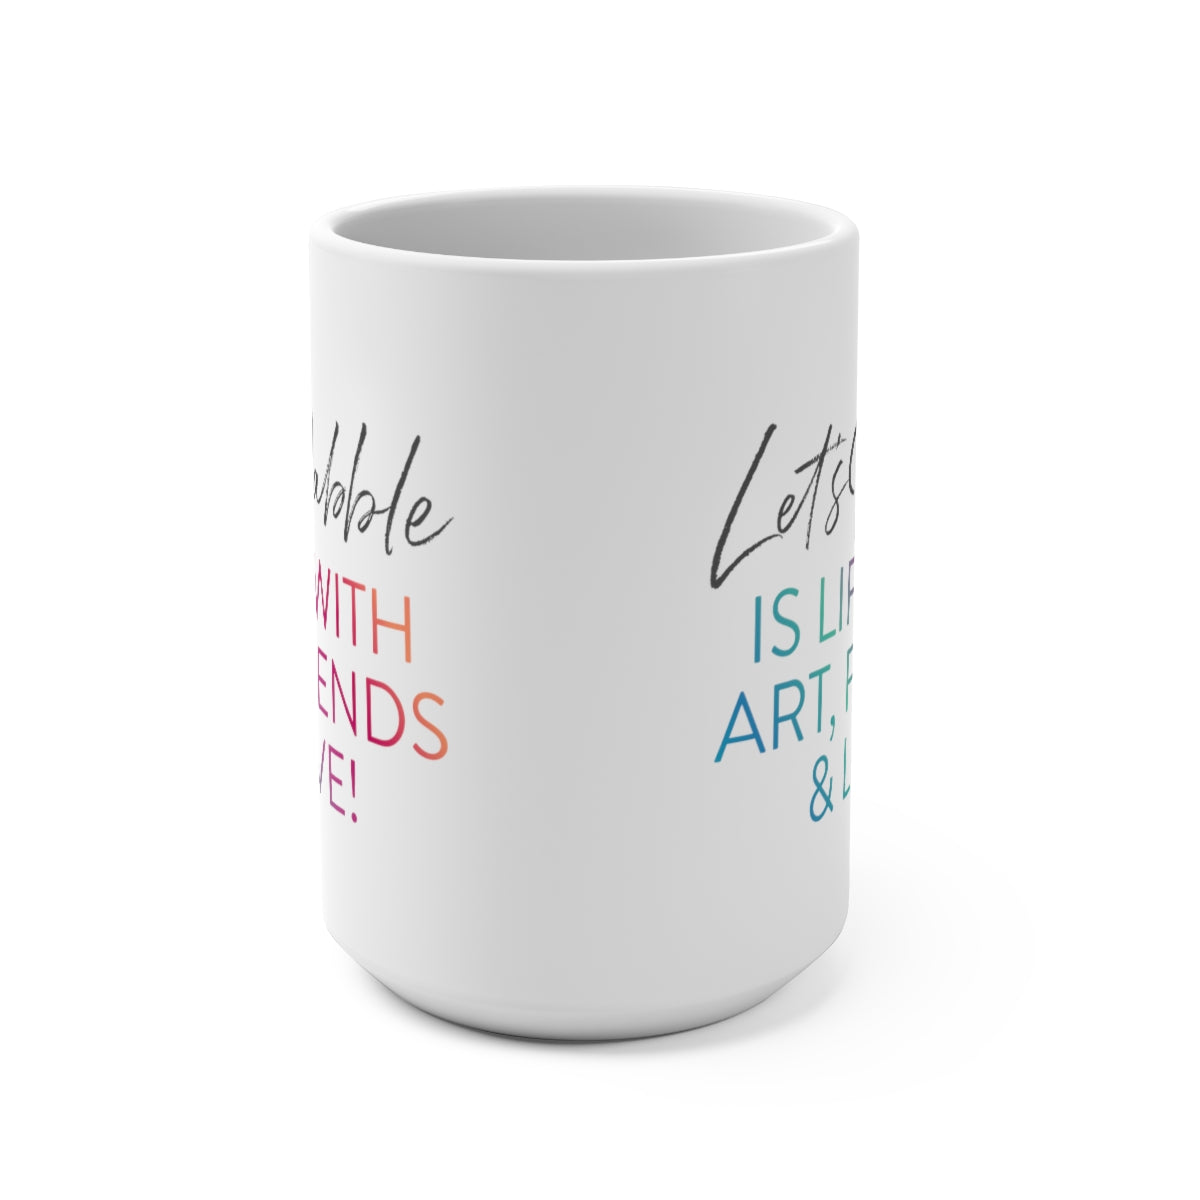 Life with Art, Friends, and Love Mug